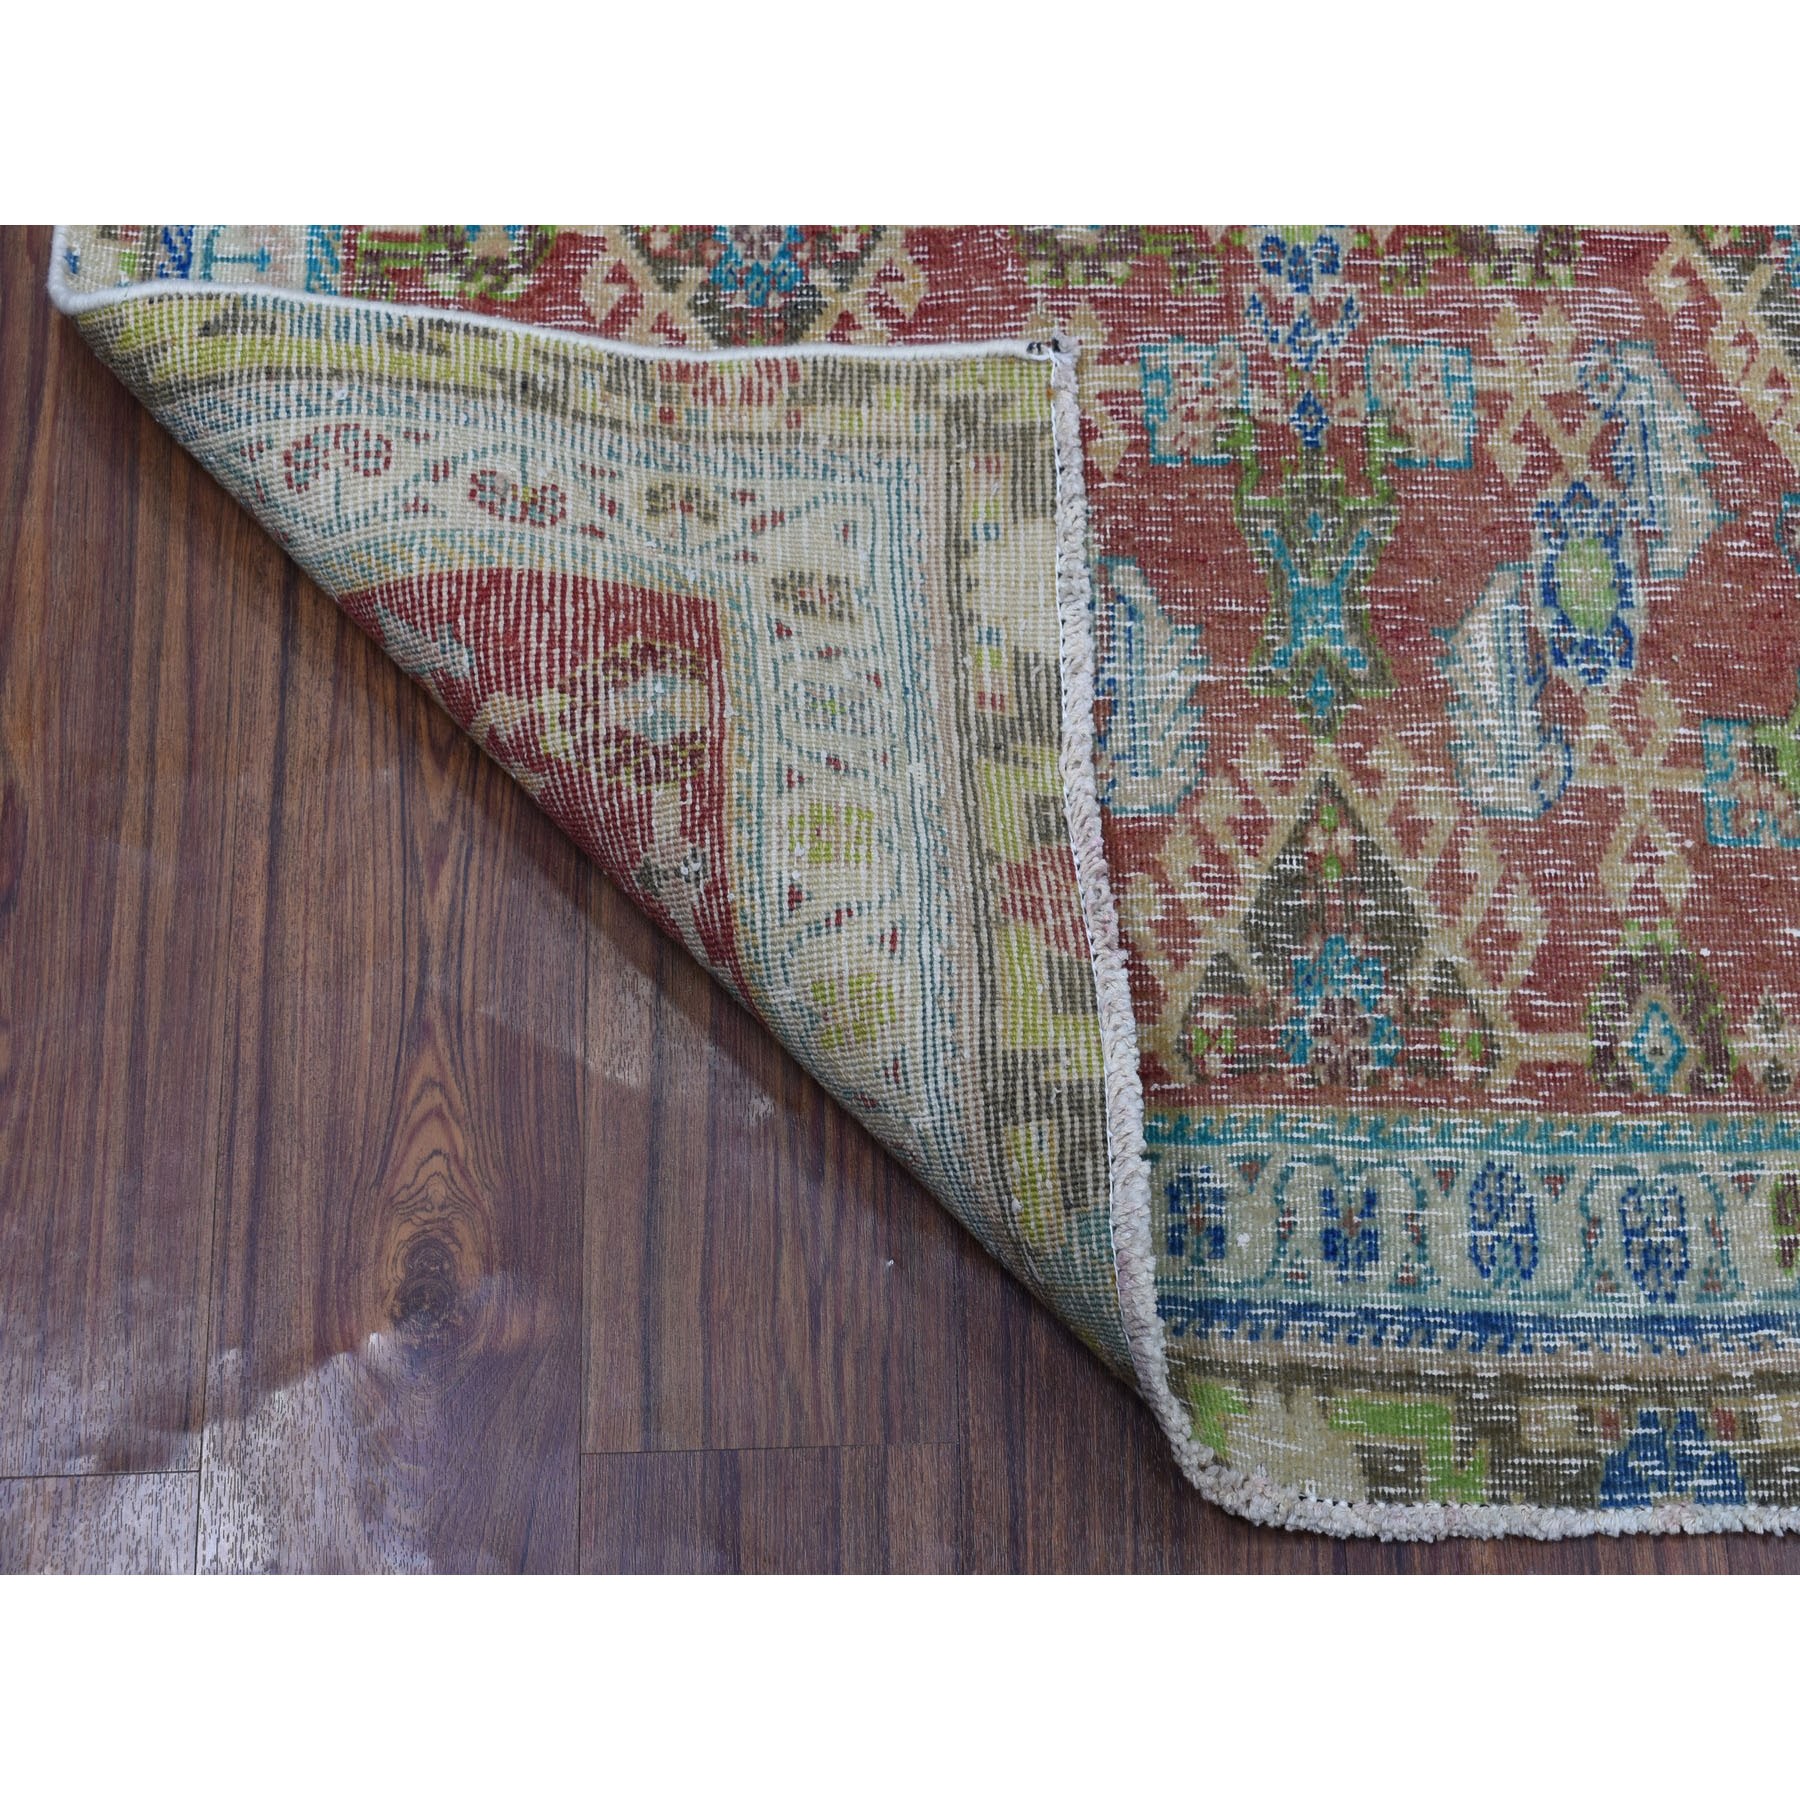 4-2 x6-6  Vintage And Worn Down Persian Qashqai Hand Knotted Bohemian Rug 